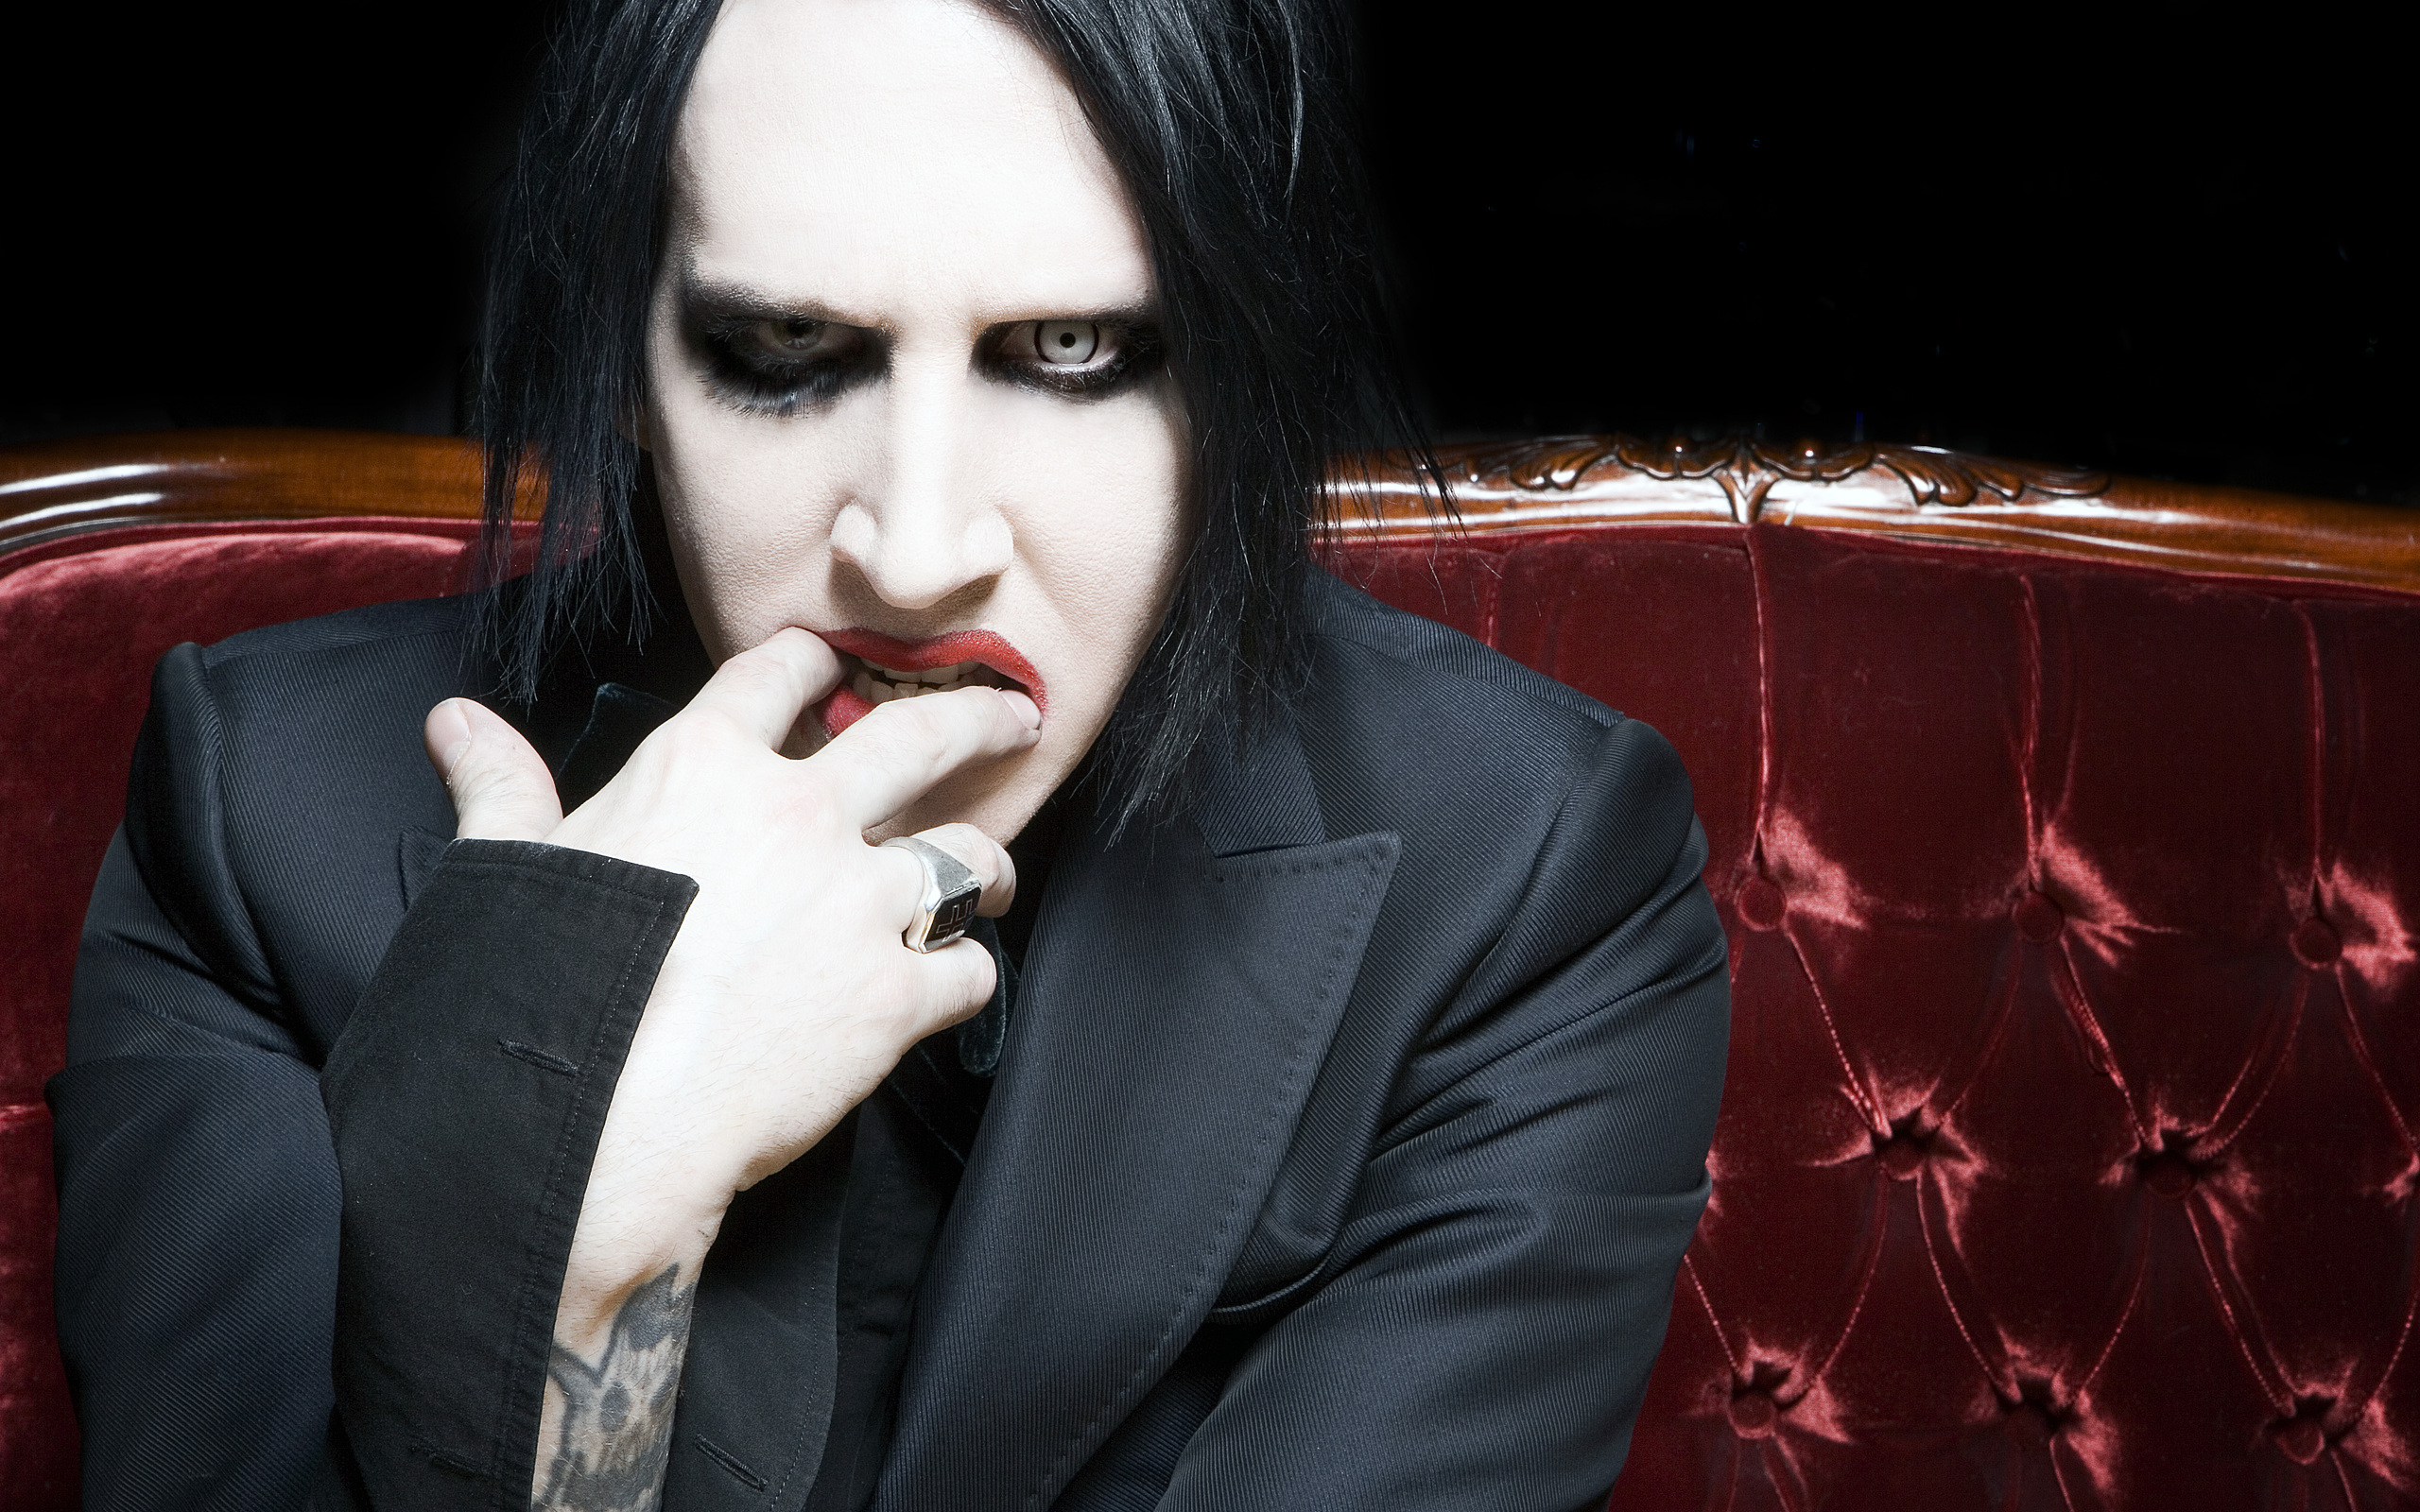 Vibrant desktop wallpaper featuring captivating Music with Marilyn Manson influence in industrial metal and heavy metal genres.